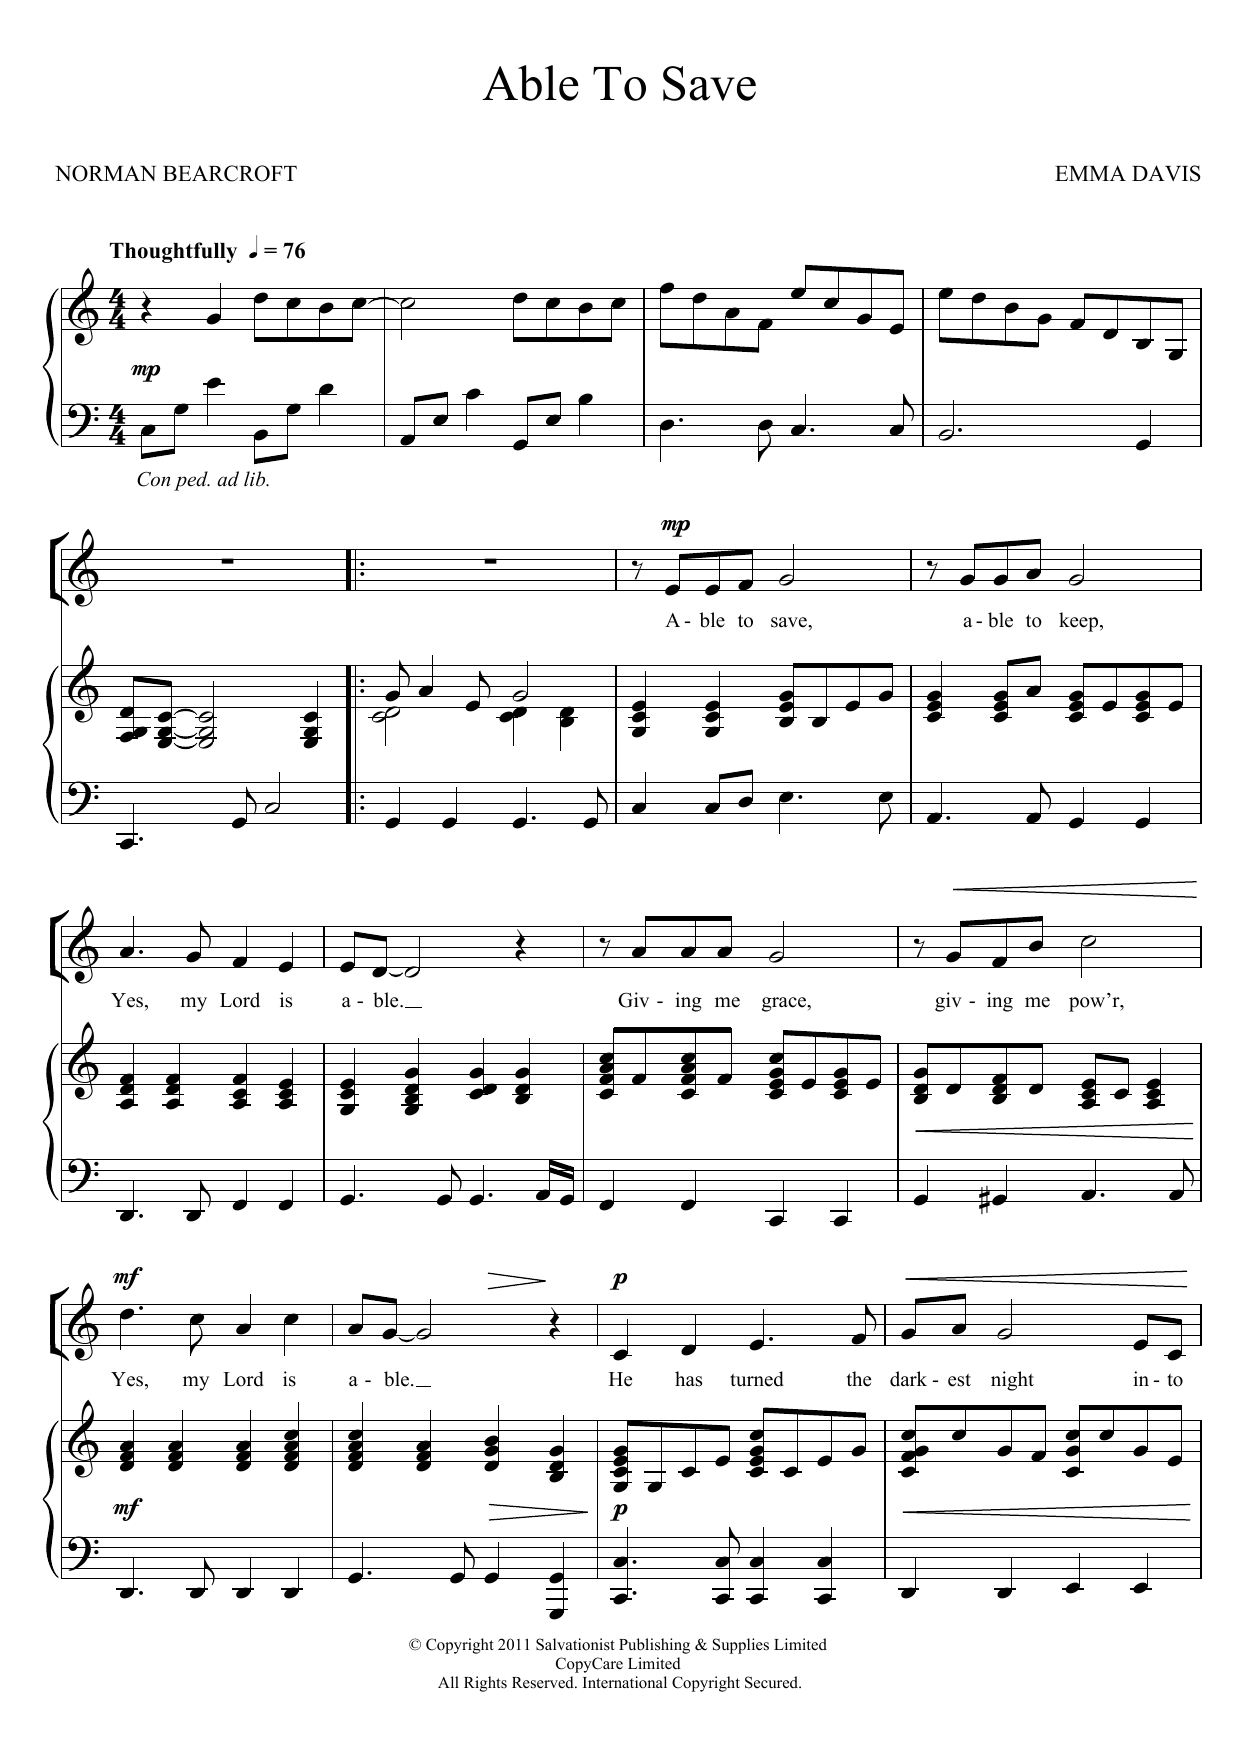 Download The Salvation Army Able To Save Sheet Music